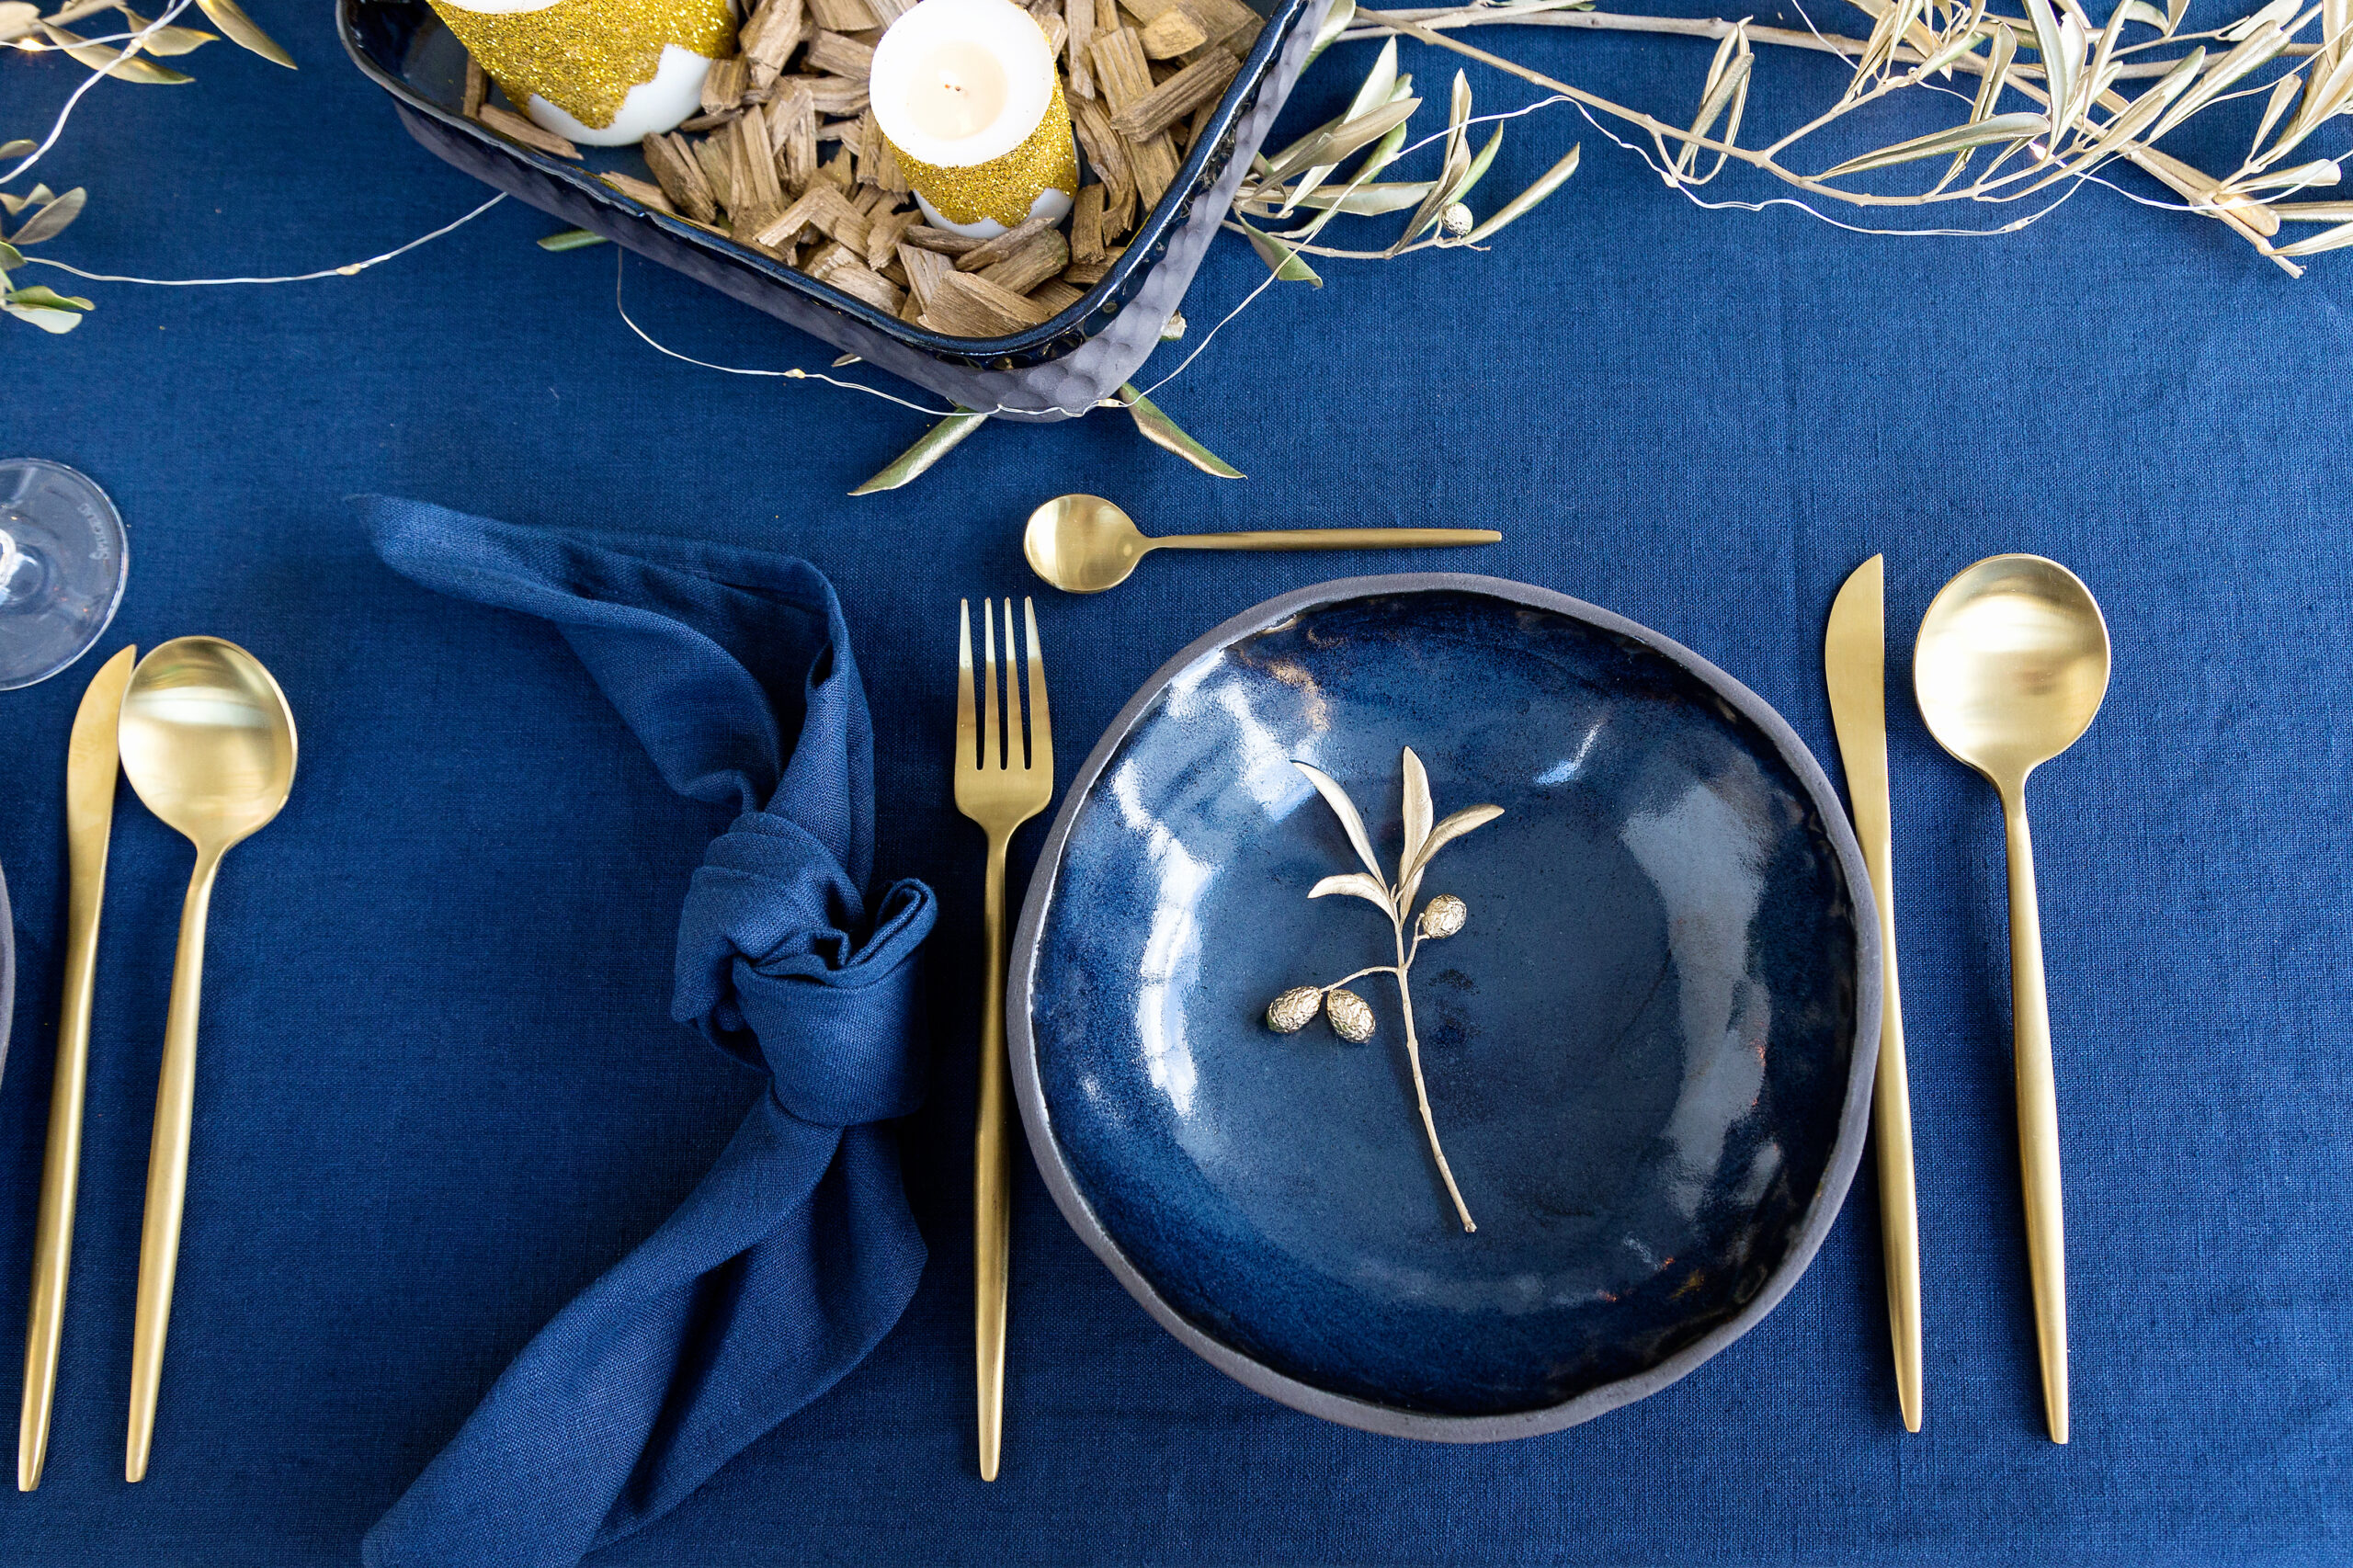 Blue and gold Christmas table setting - Originals Interiors